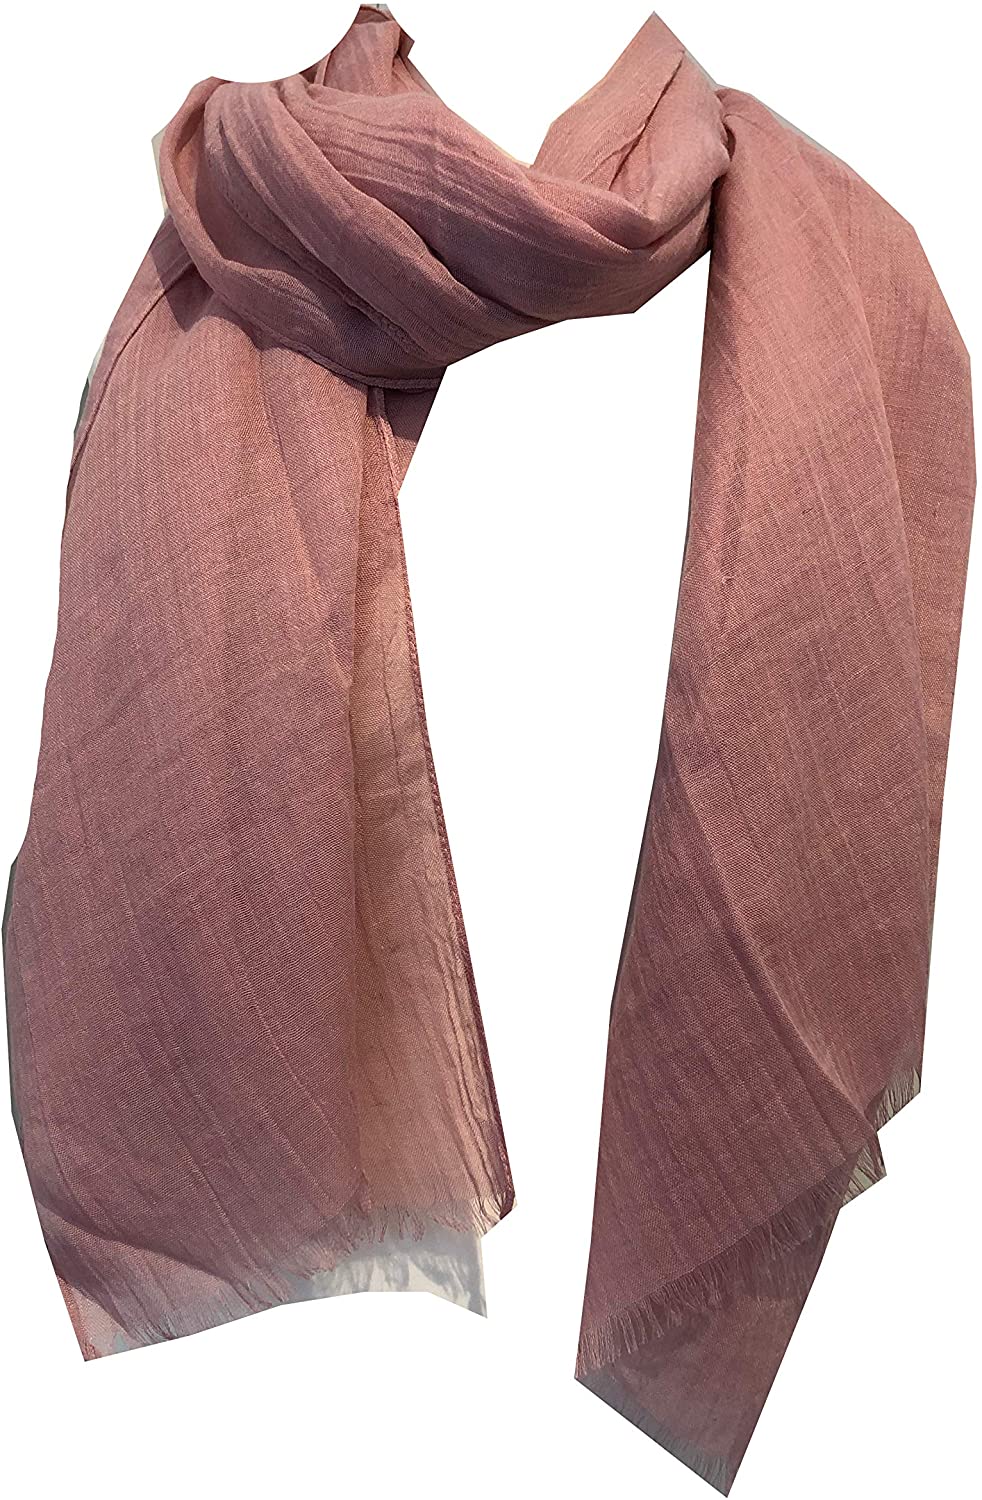 Baby pink plain soft long Scarf/wrap with frayed edge